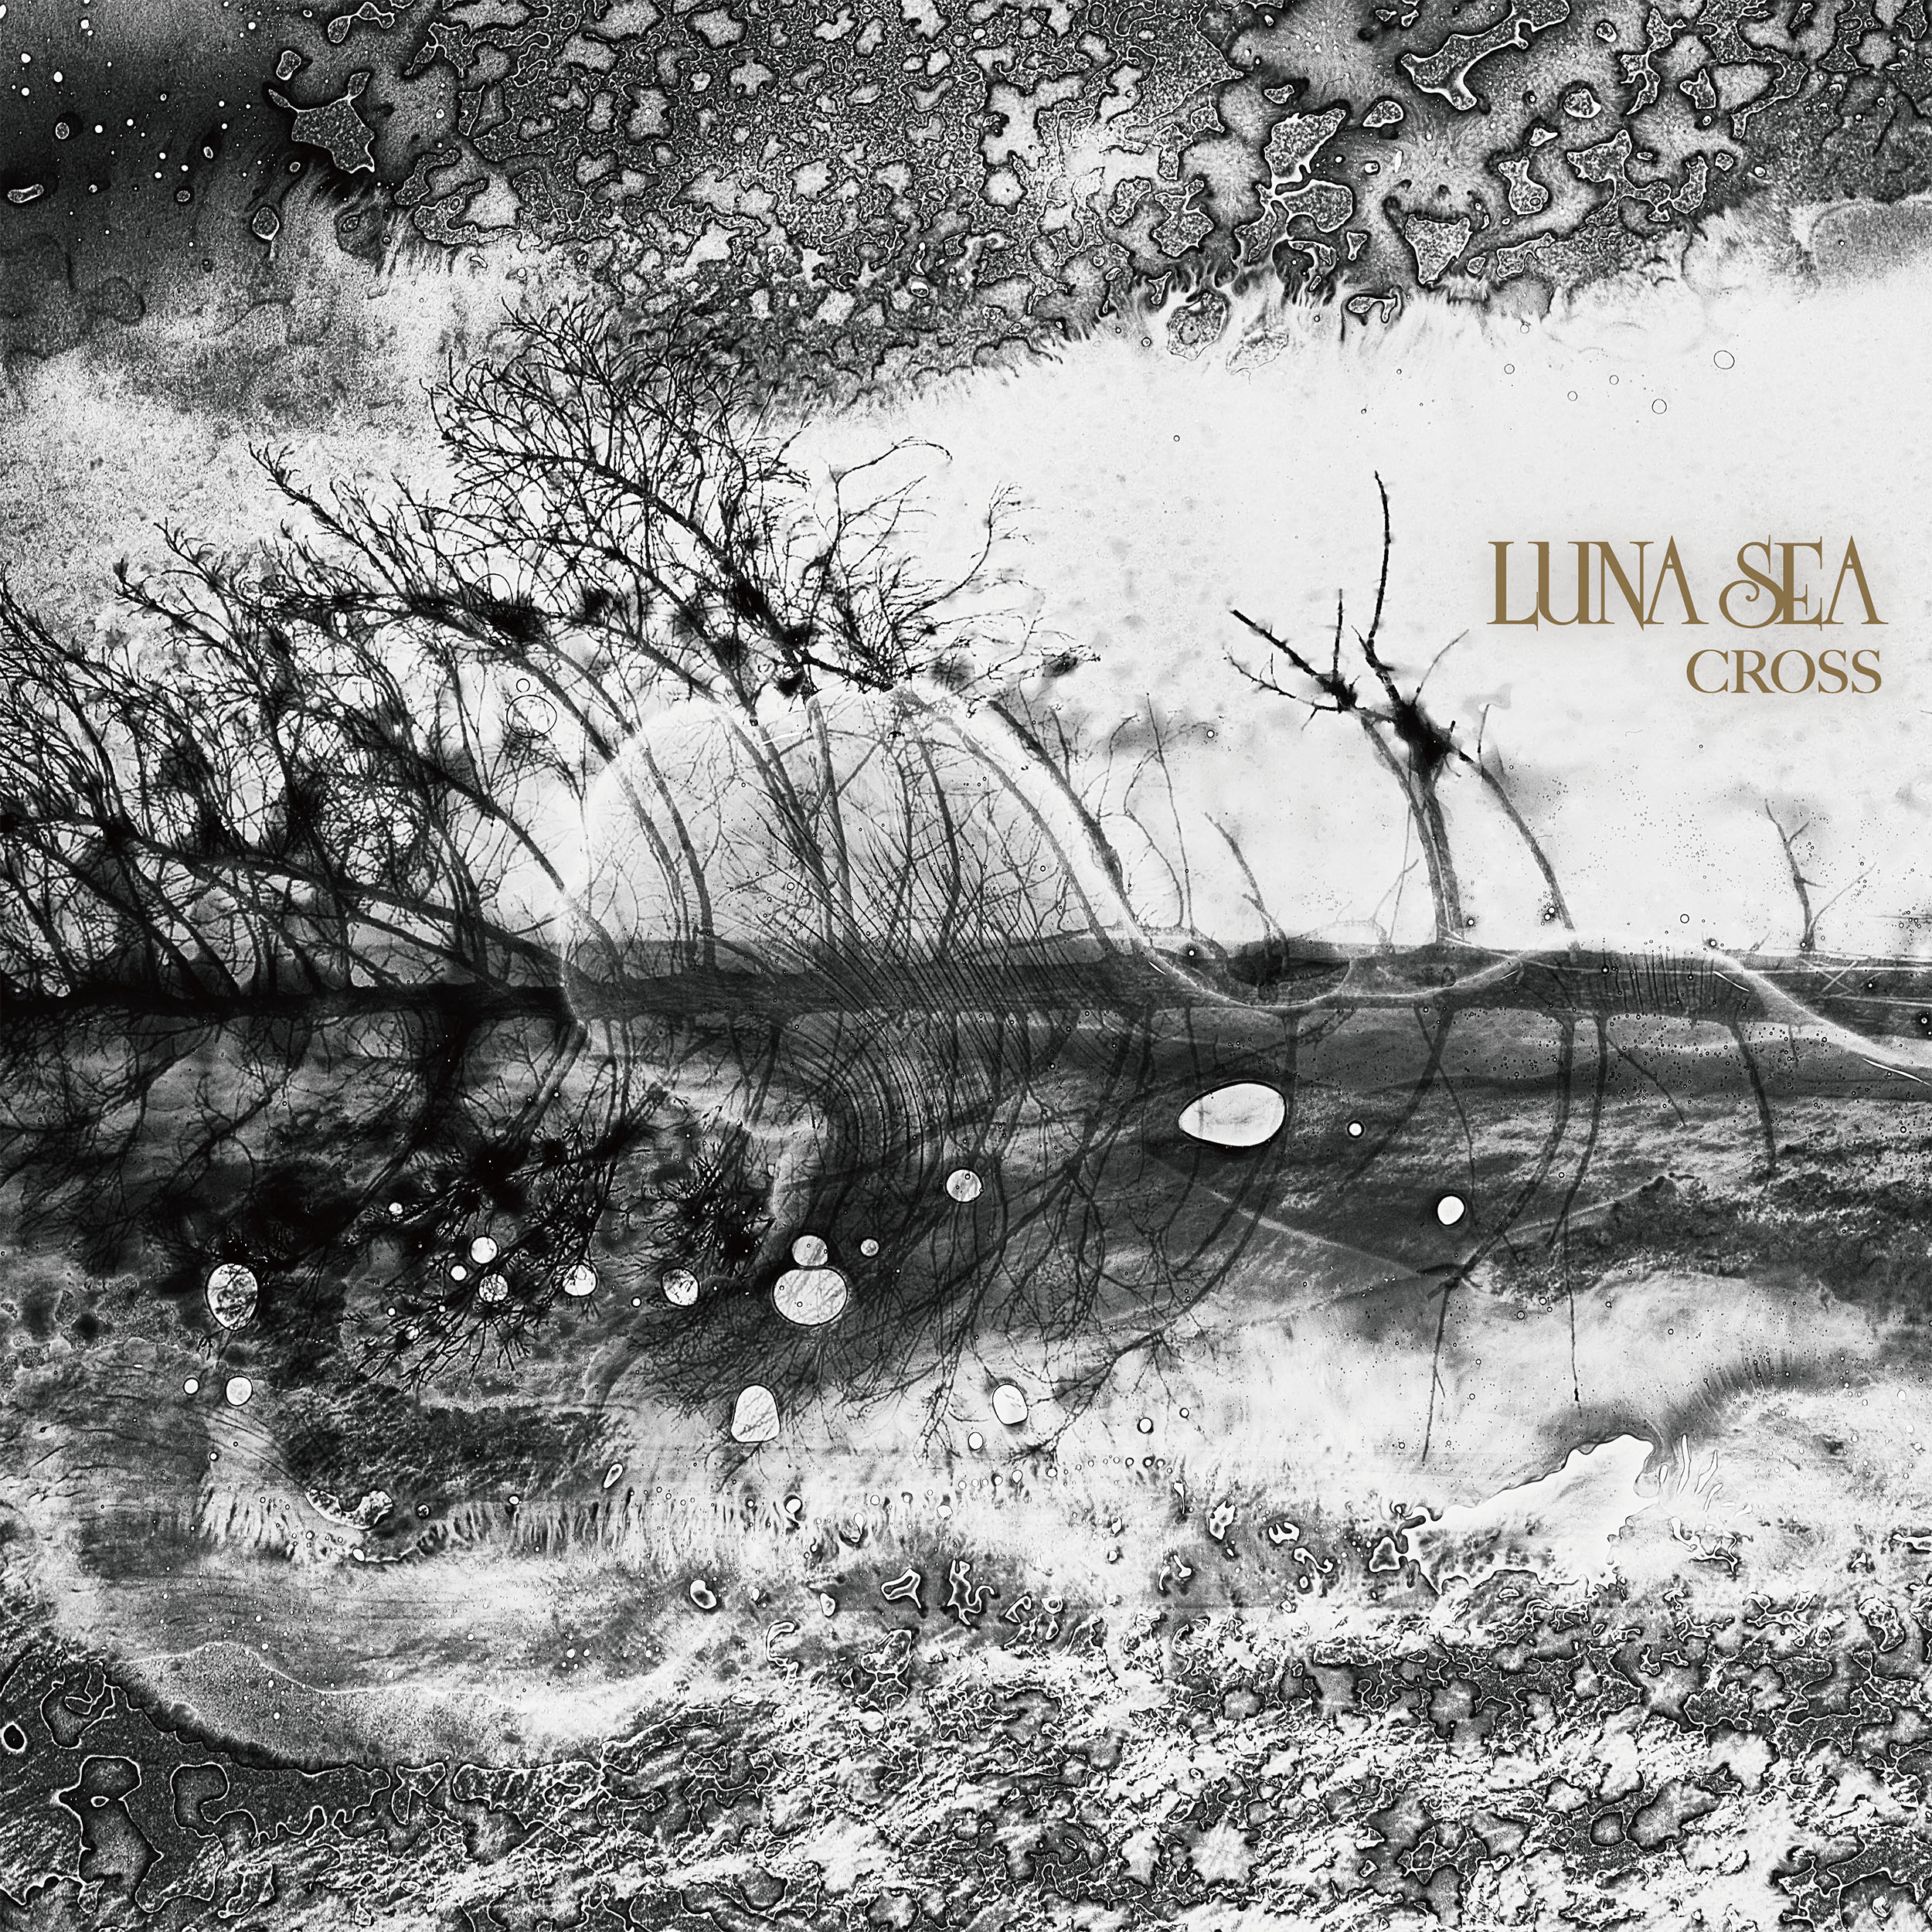 Produced by Steve Lillywhite, LUNA SEA's New Album CROSS. Special